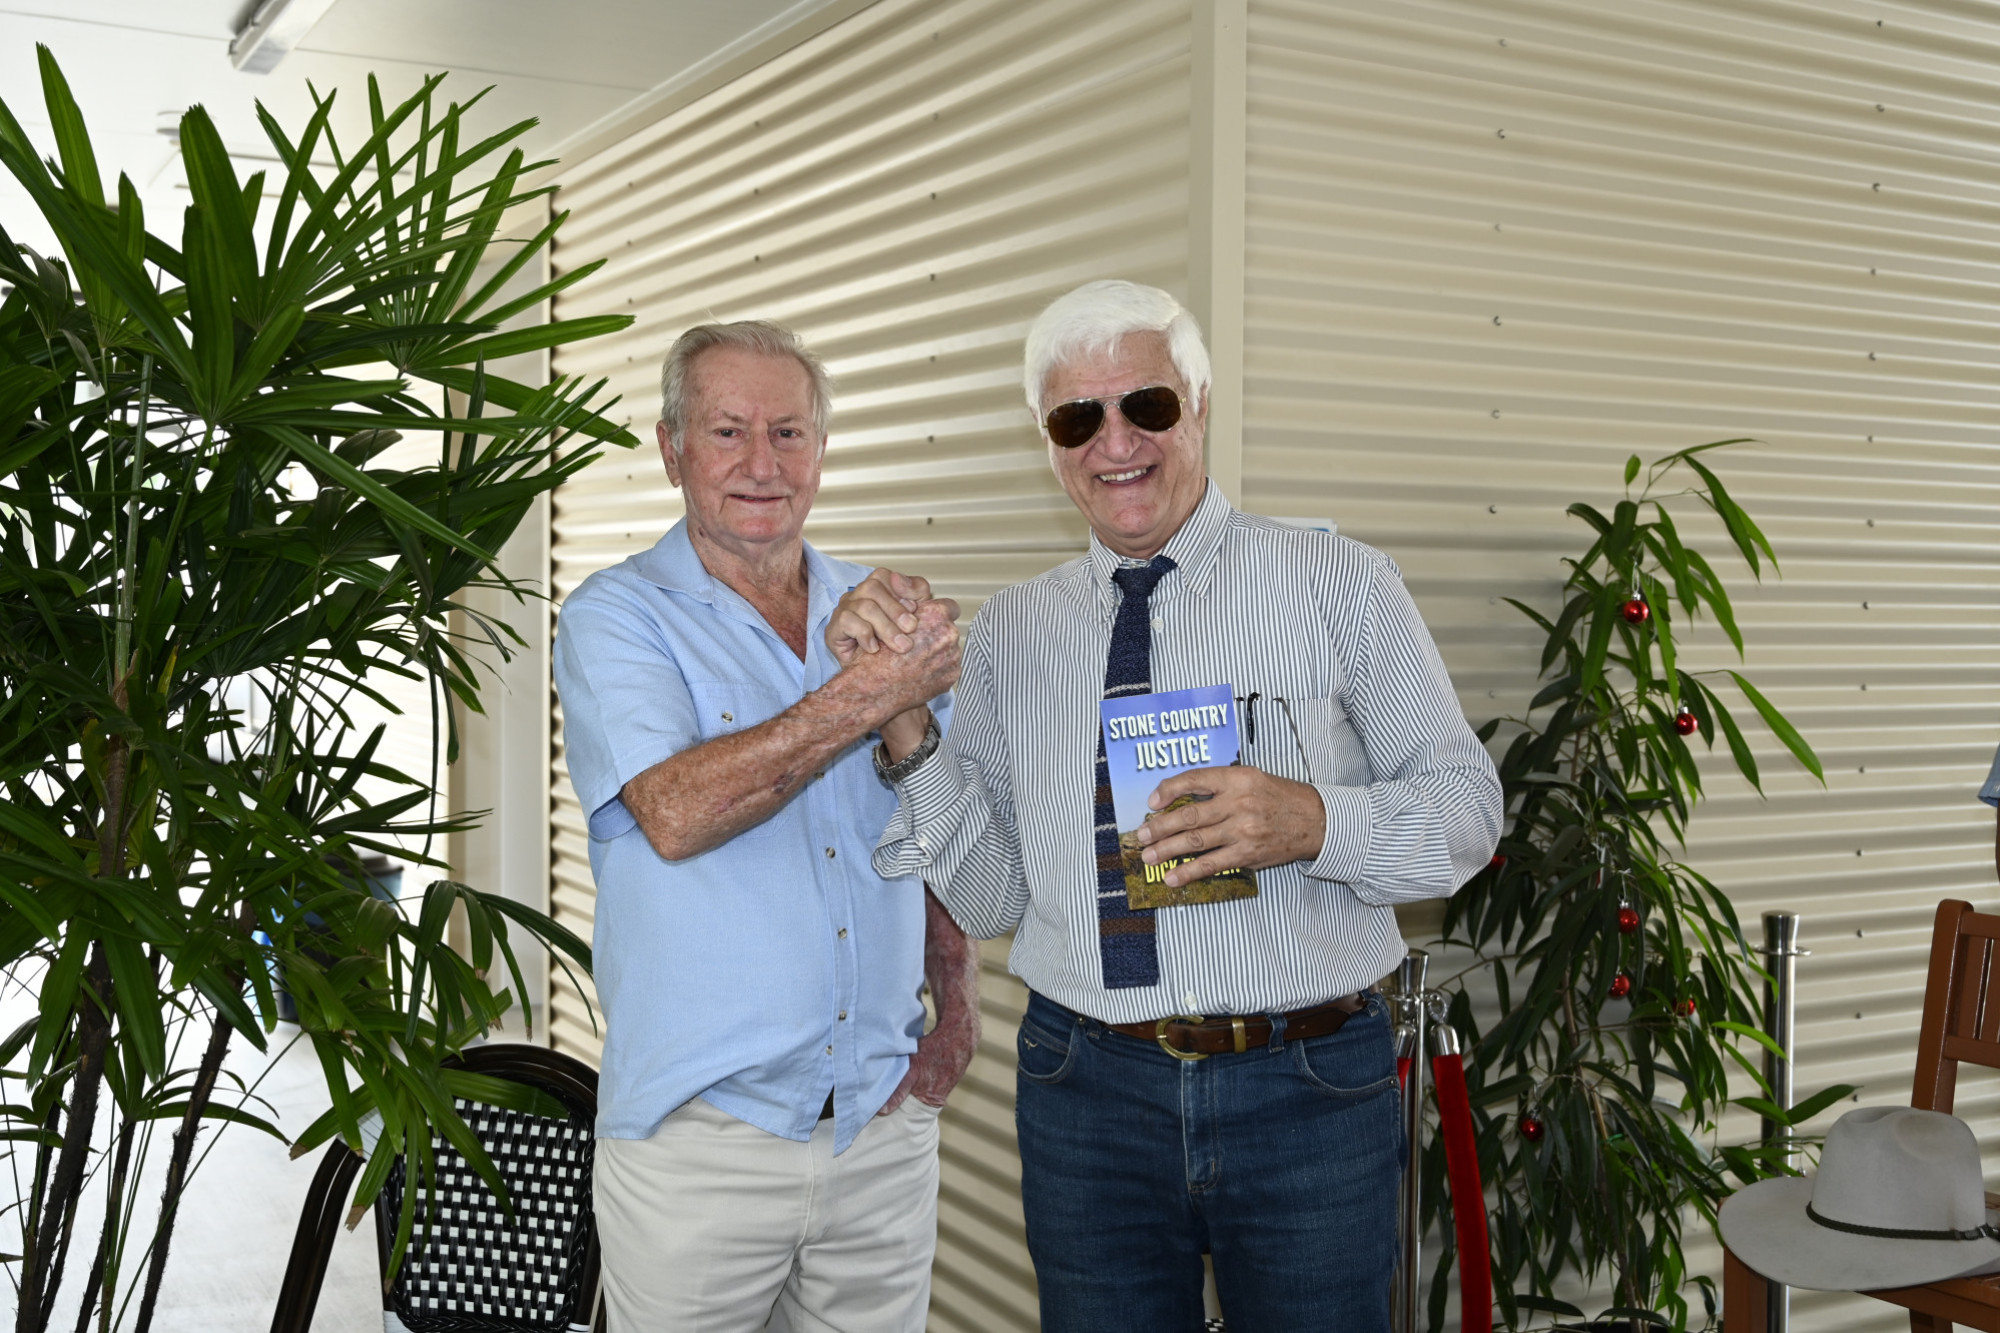 Mareeba-based writer Dick Eussen held his official book launch last Tuesday, December 15 for his first fiction book which was attended by friends, family and Federal Member for Kennedy Bob Katter